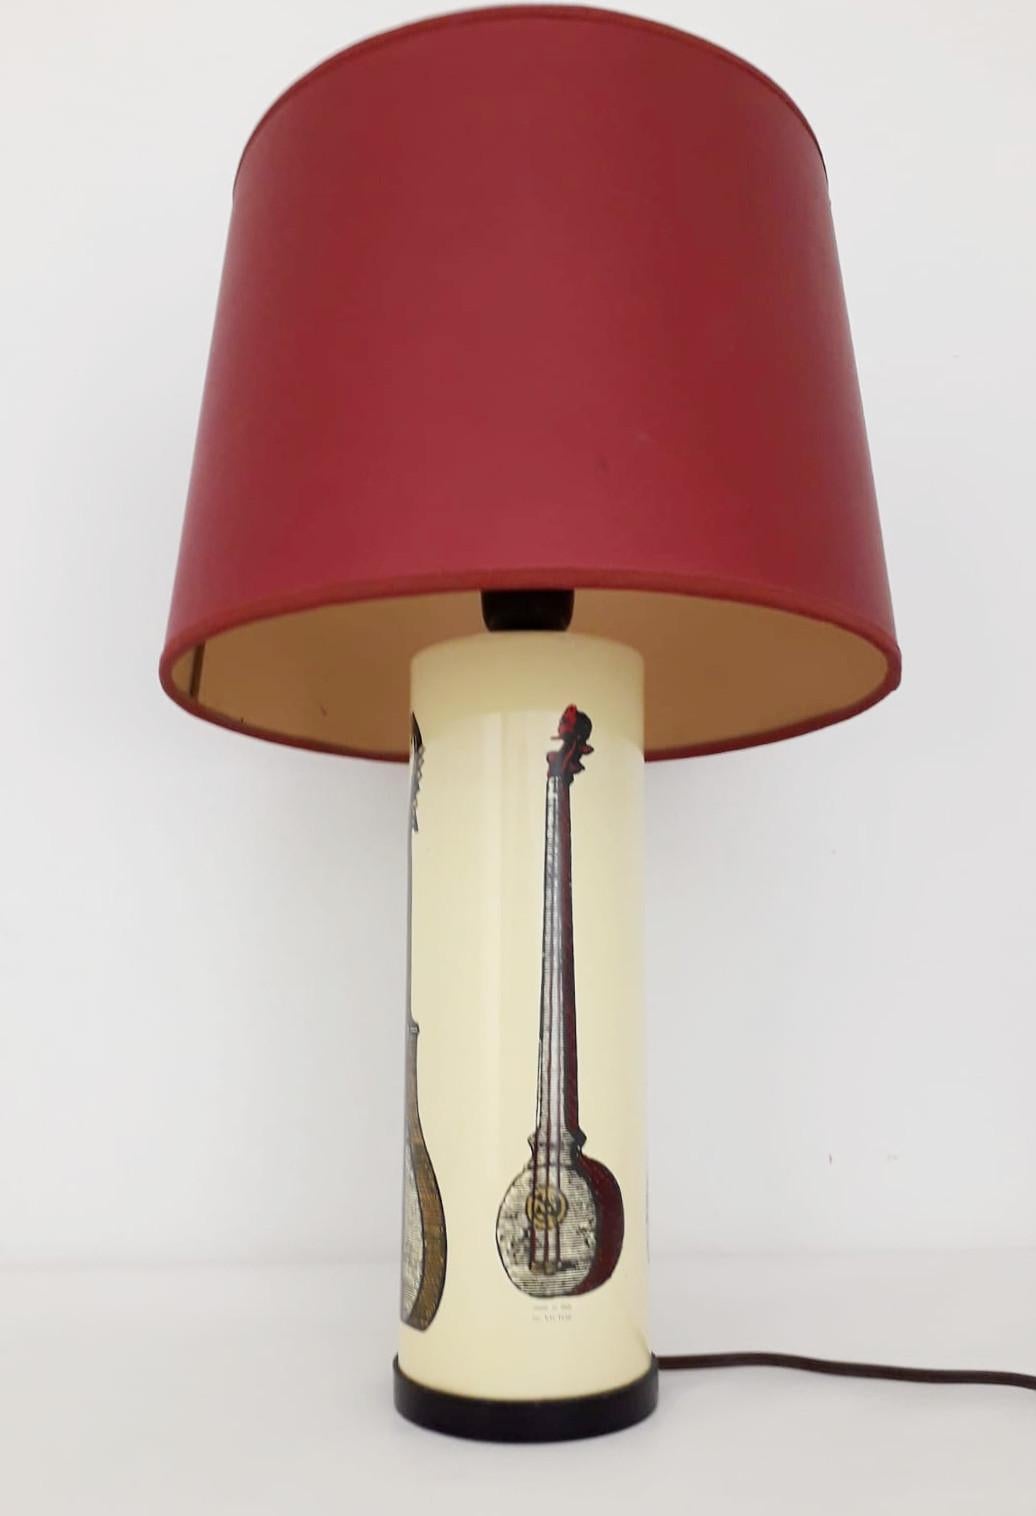 Italian vintage table lamp with painted metal lamp base decorated with musical instruments by using lithograph and transfer print, in the style of Fornasetti / Made in Italy in the 1970s
Marked 